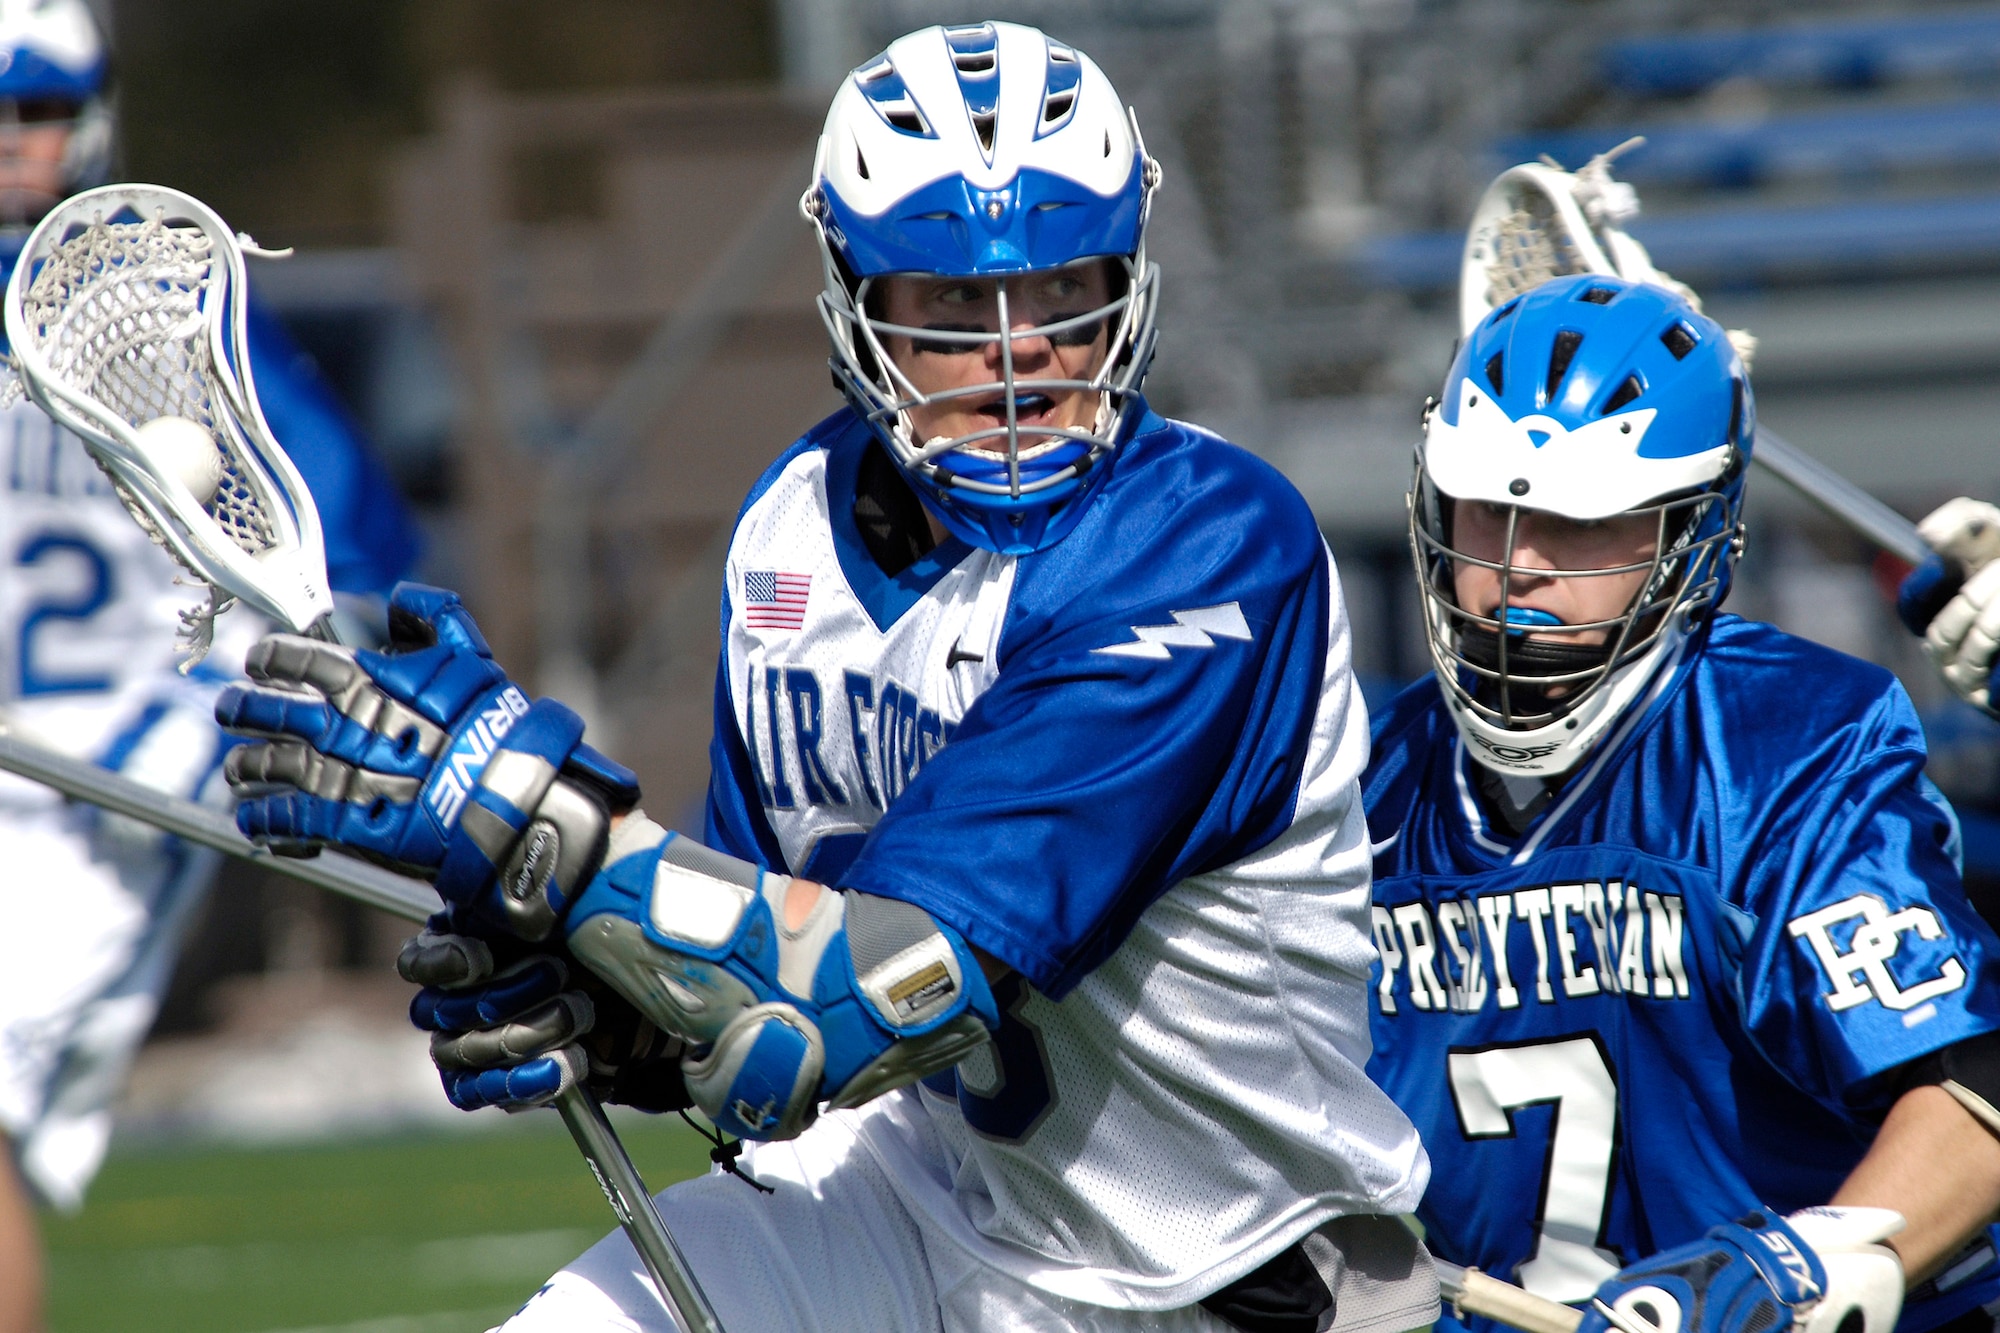 Air Force Academy senior Jack Parchman works towards the goal during third period lacrosse action, adding a score as Air Force defeated Presbyterian College 12-4 March 25 at the Cadet Lacrosse Stadium in Colorado Springs, Colo. The Falcons, undefeated at home, move to 2-4 on the season. (U.S. Air Force photo/Mike Kaplan)